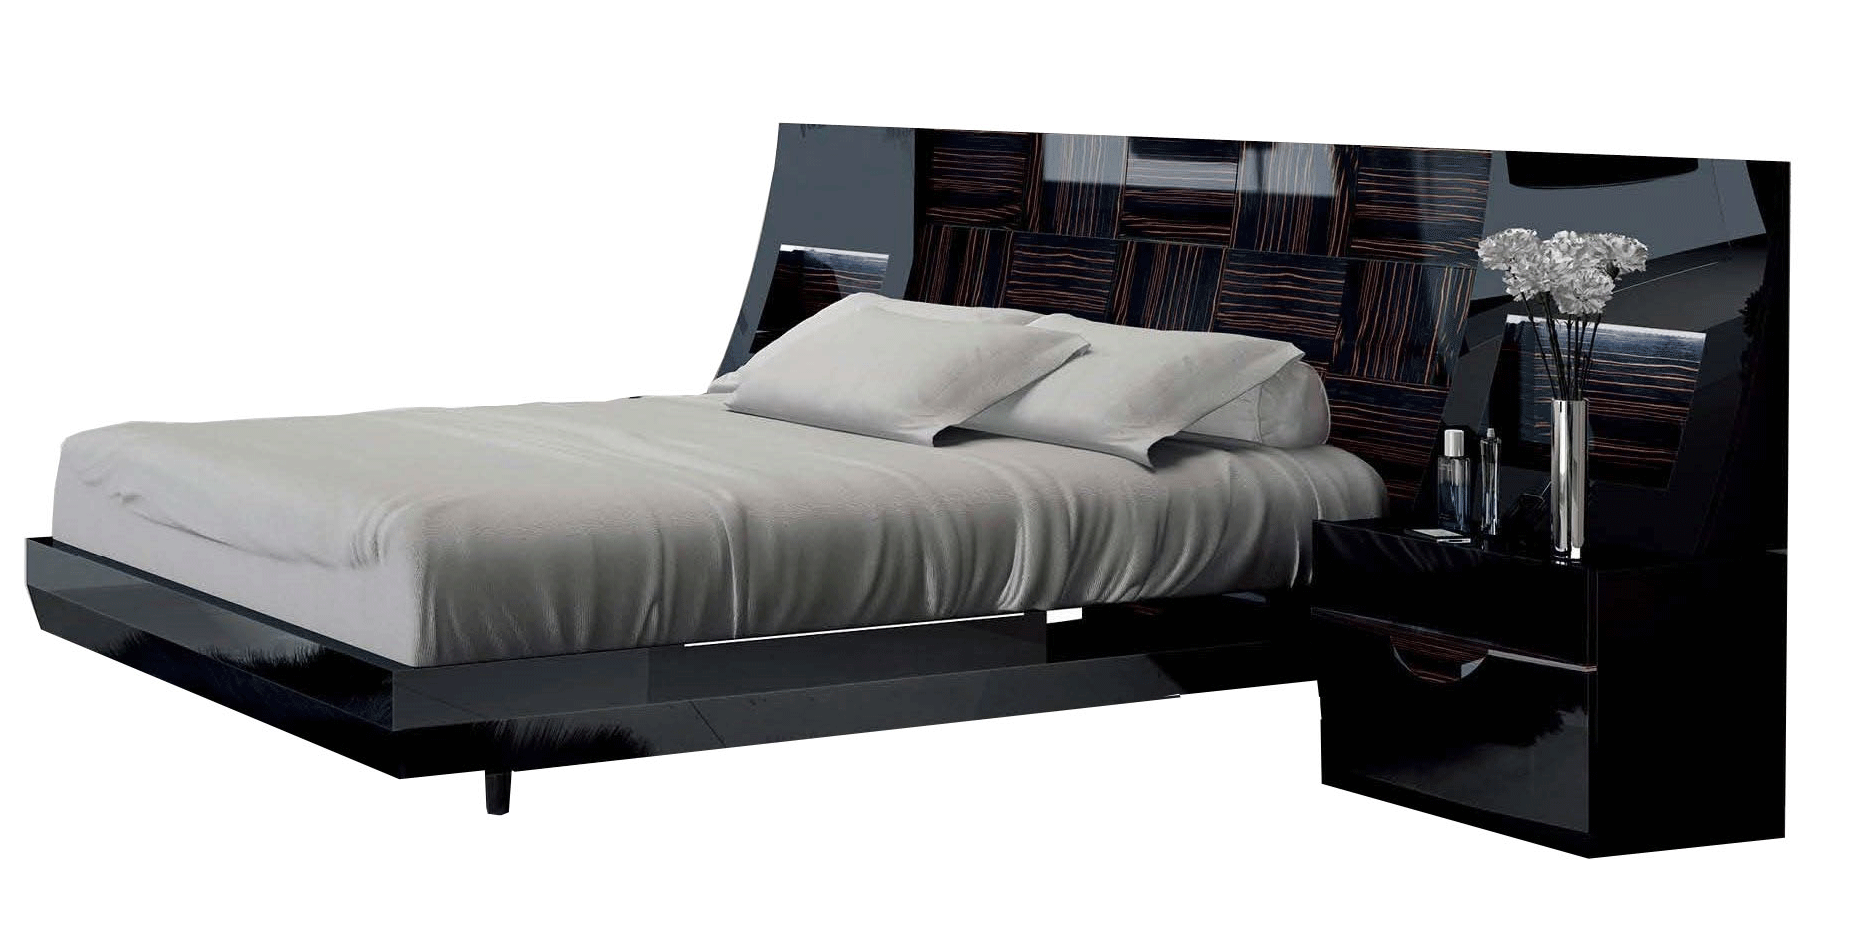 Bedroom Furniture Modern Bedrooms QS and KS Marbella Bed QS bed ONLY